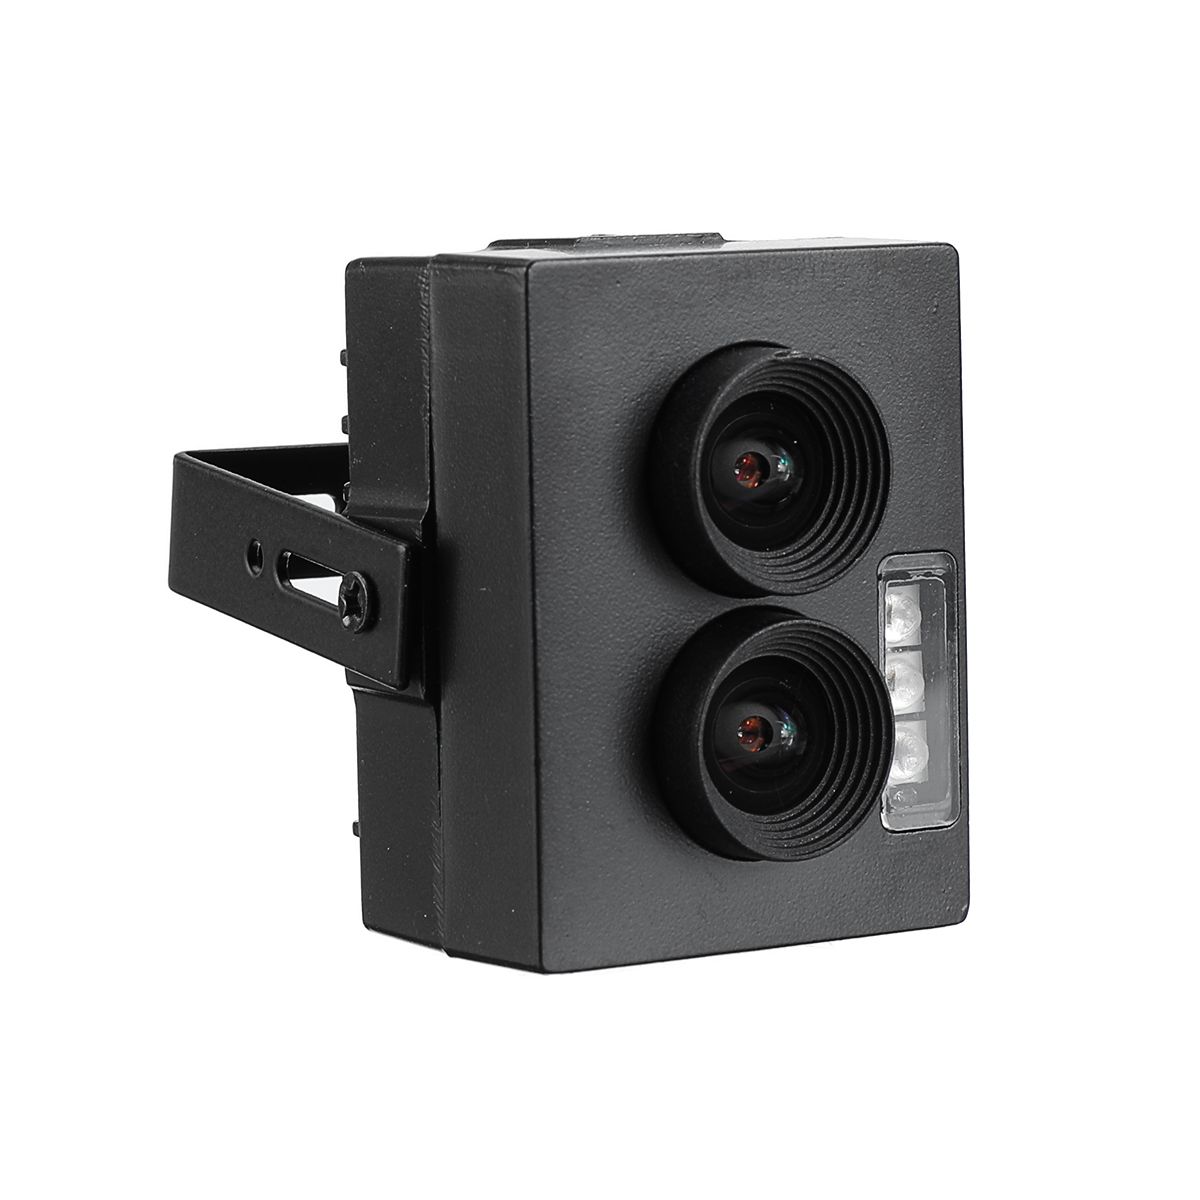 2-Million-USB-Binocular-Camera-Module-for-Face-Recognition-Live-Detection-Wide-Dynamic-Infrared-Nigh-1639085